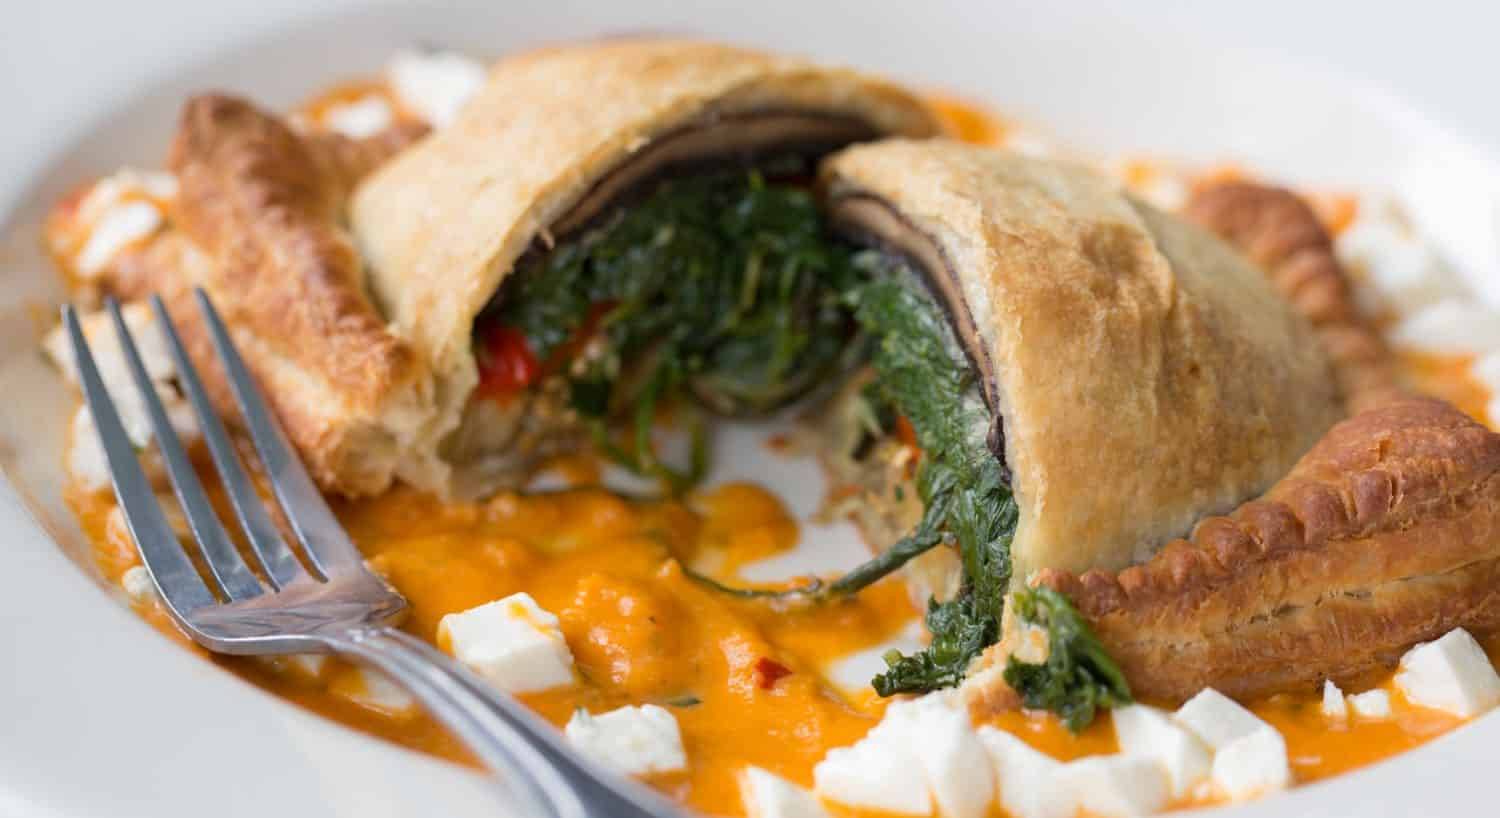 Close up view of a puffed pastry dish stuffed with spinach and vegetables surrounded by an orange cream sauce and mozzarella crumbles